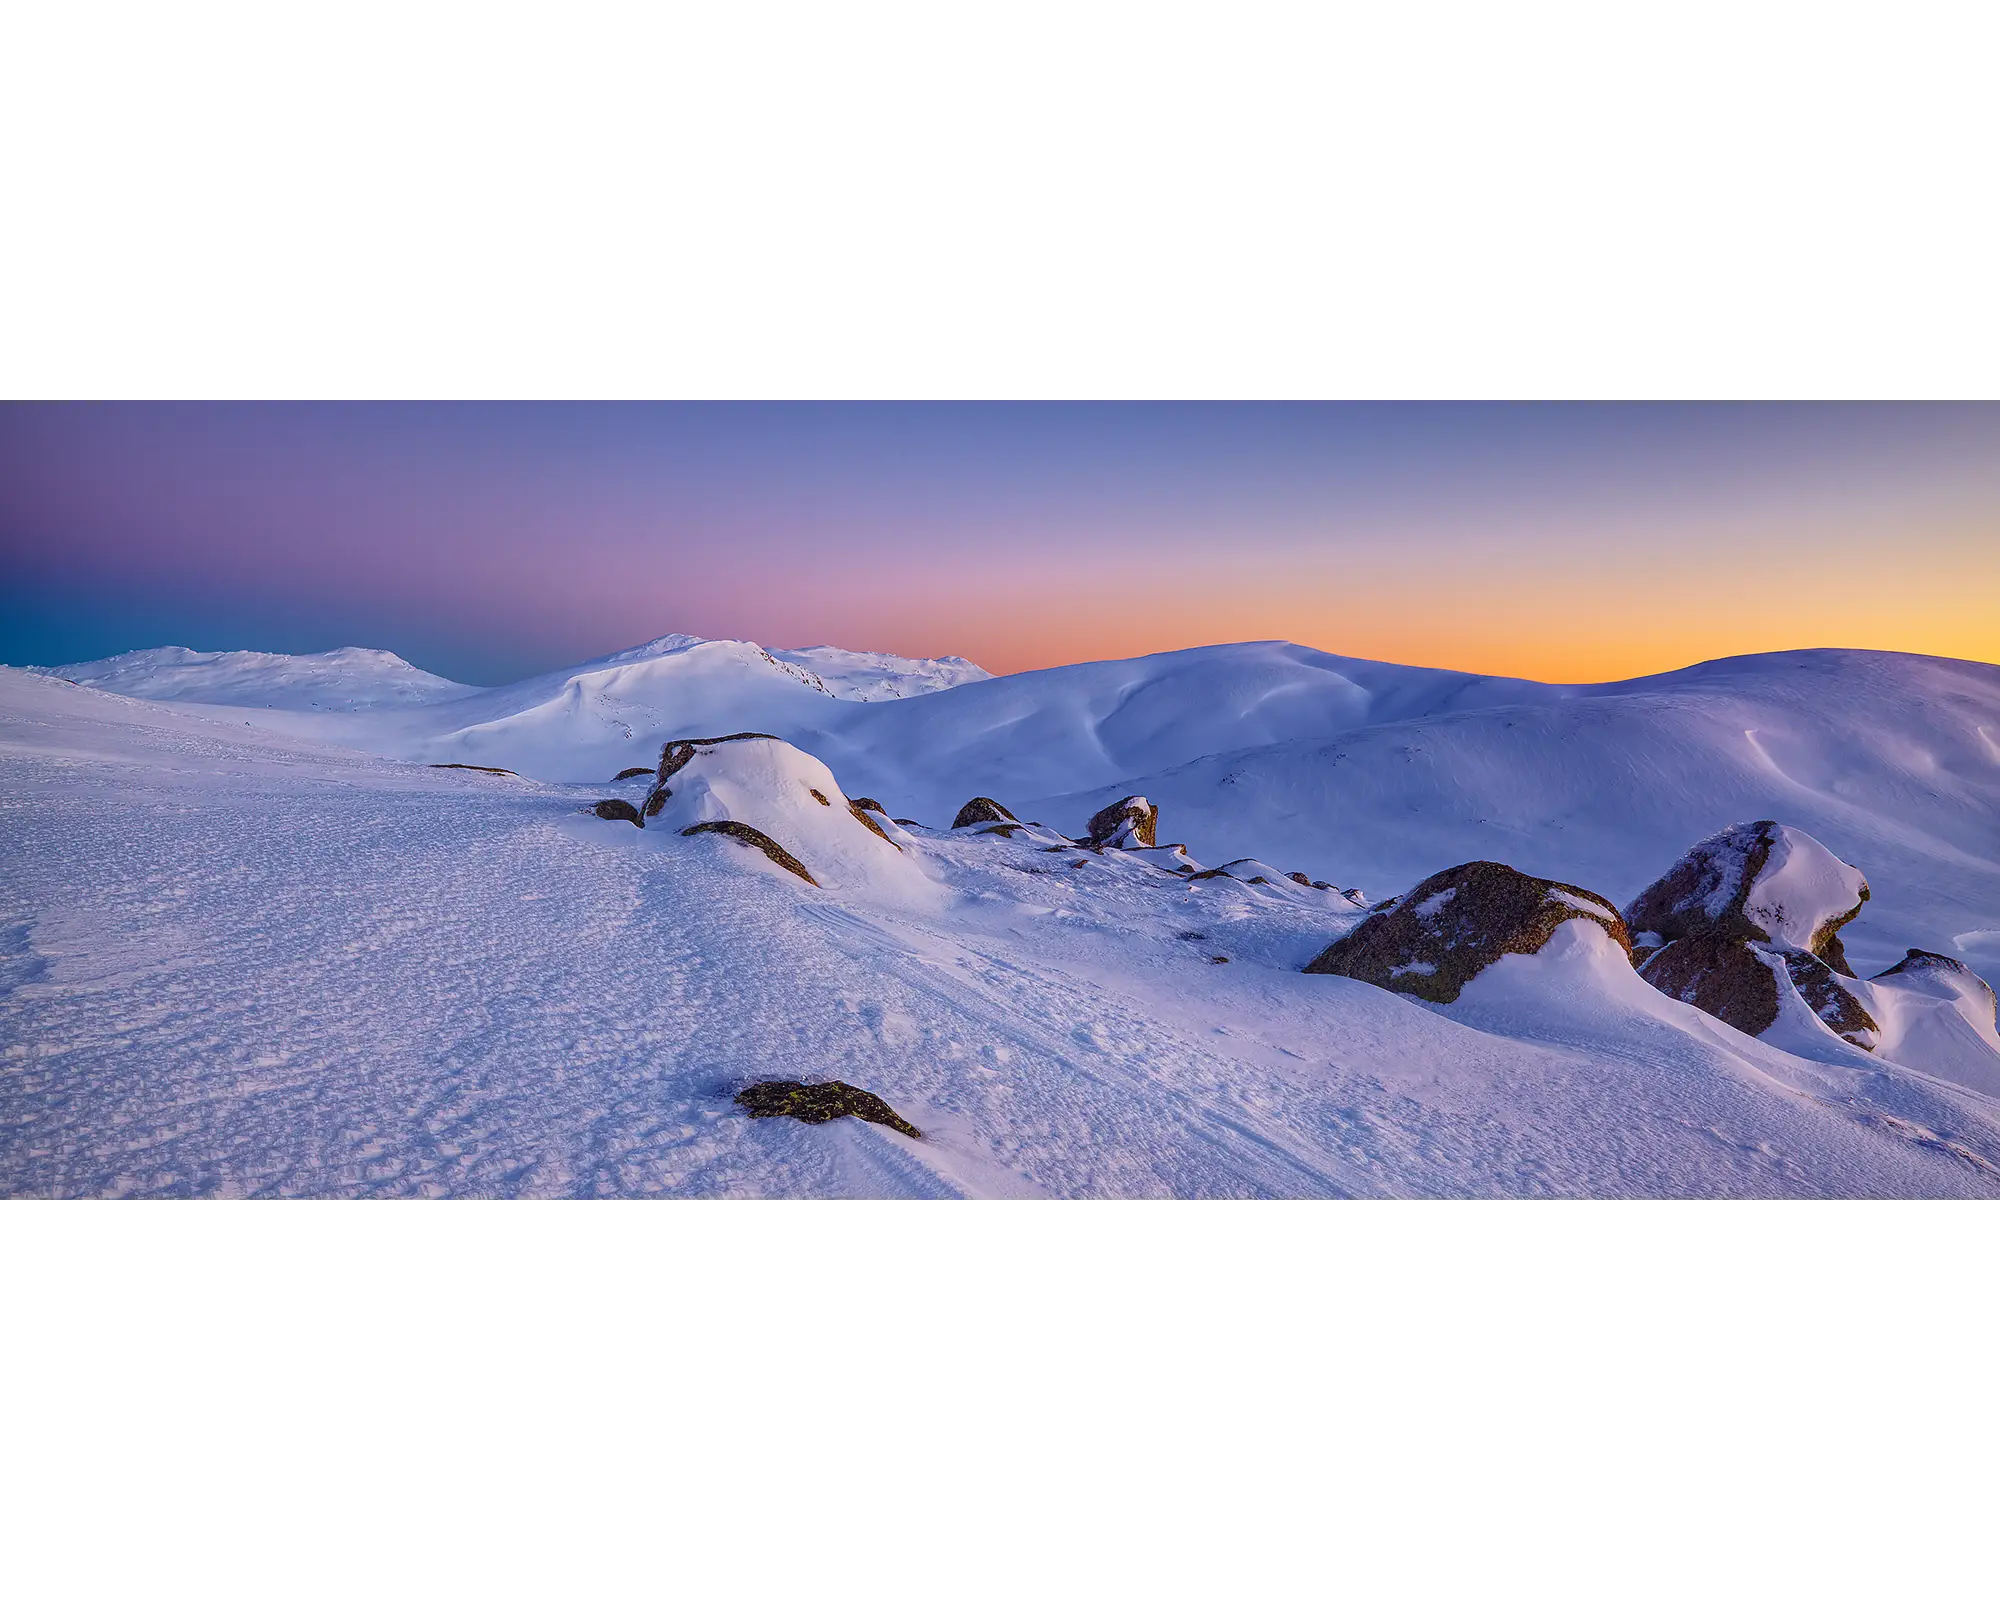 Cold And Alone. Winter sunrise with snow, Kosciuszko National Park, New South Wales, Australia.